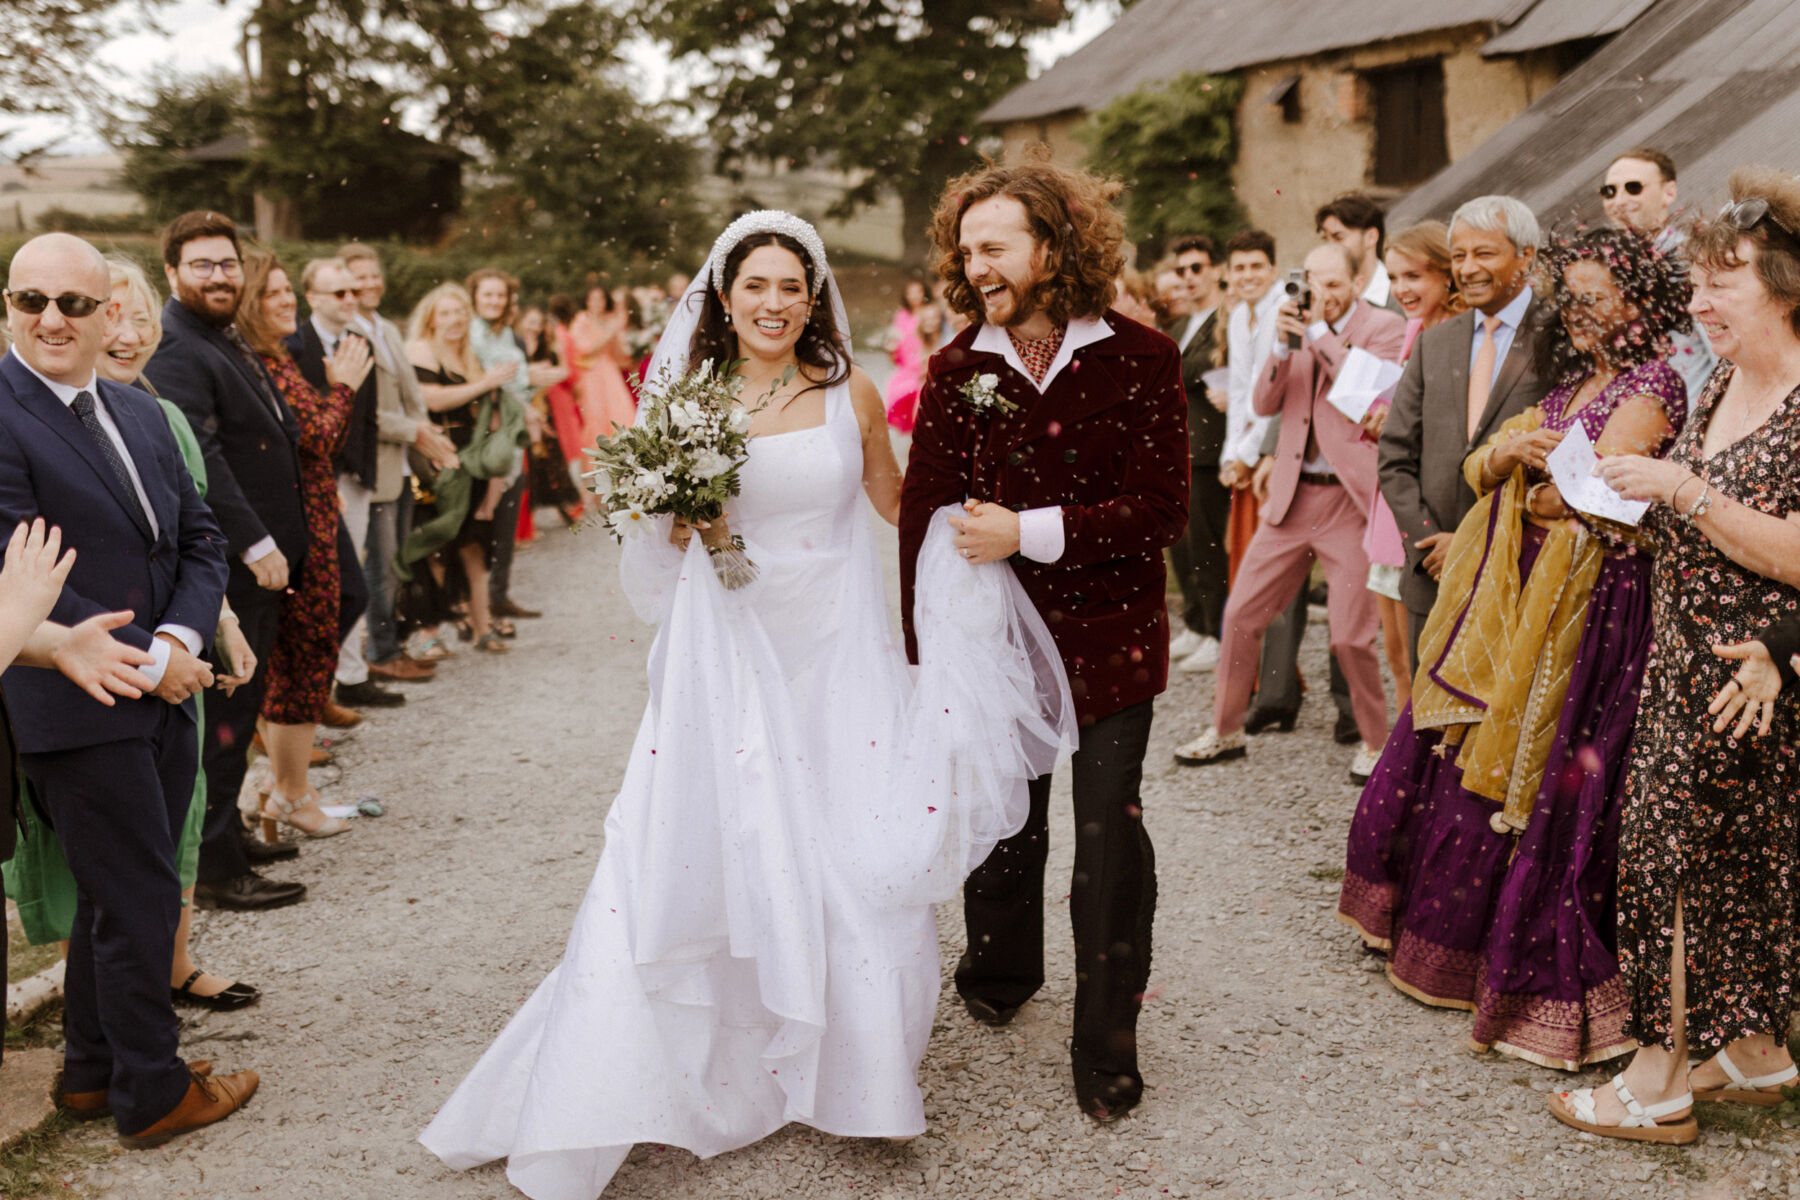 Very happy bride and groom in a shower of confetti. Bride hooks her arm around the groom, who is wearing 70's inspired flares and a dark red velvet jacket. Bride wears Jessica Bennett dress, pearl headband, veil and carries a bouquet of all white flowers.